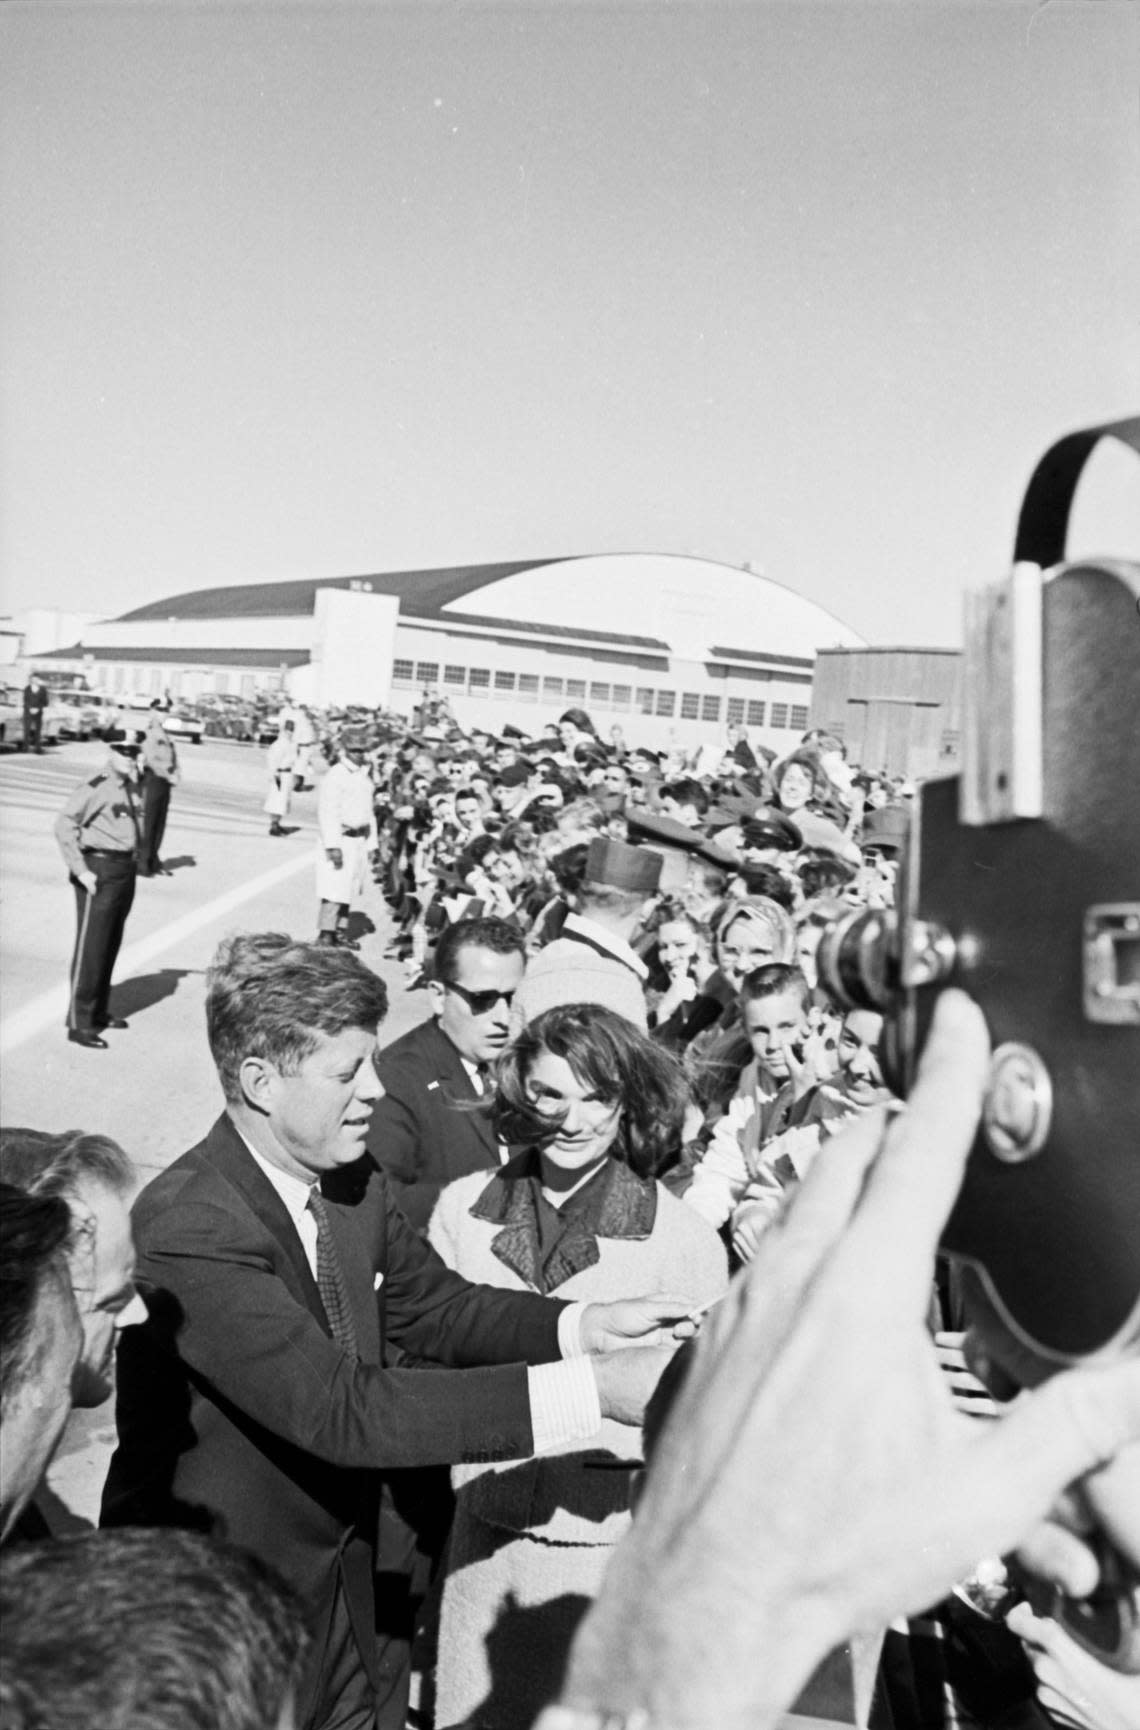 President John F. Kennedy with Jackie Kennedy signing autographs at Carswell Air Force Base in Fort Worth on their way to Dallas Love Field. Nov. 22, 1963